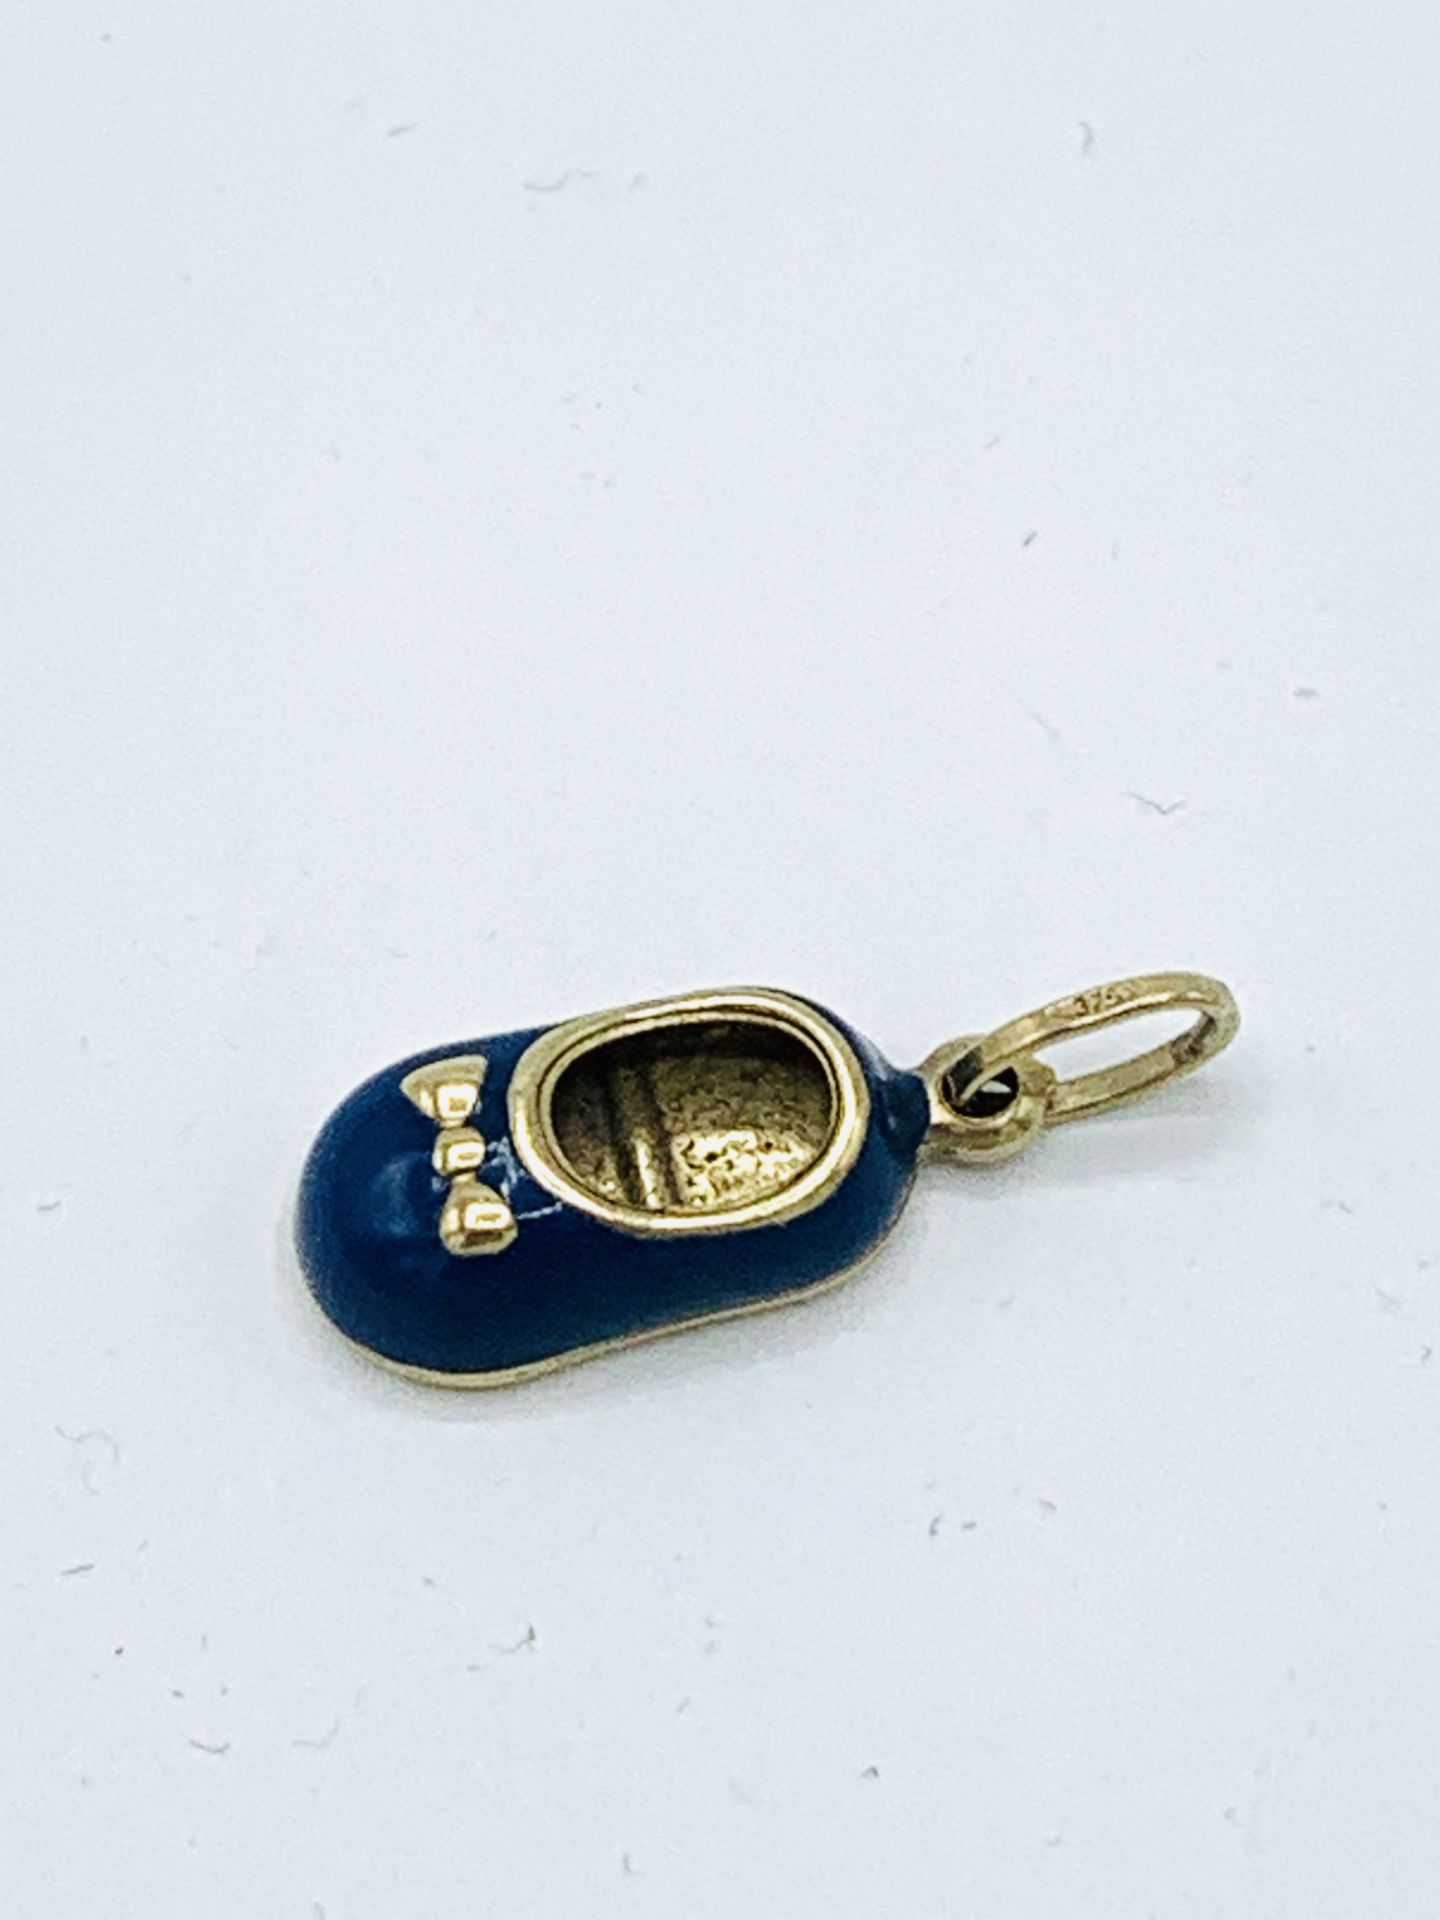 9ct gold young child's shoe charm - Image 2 of 2